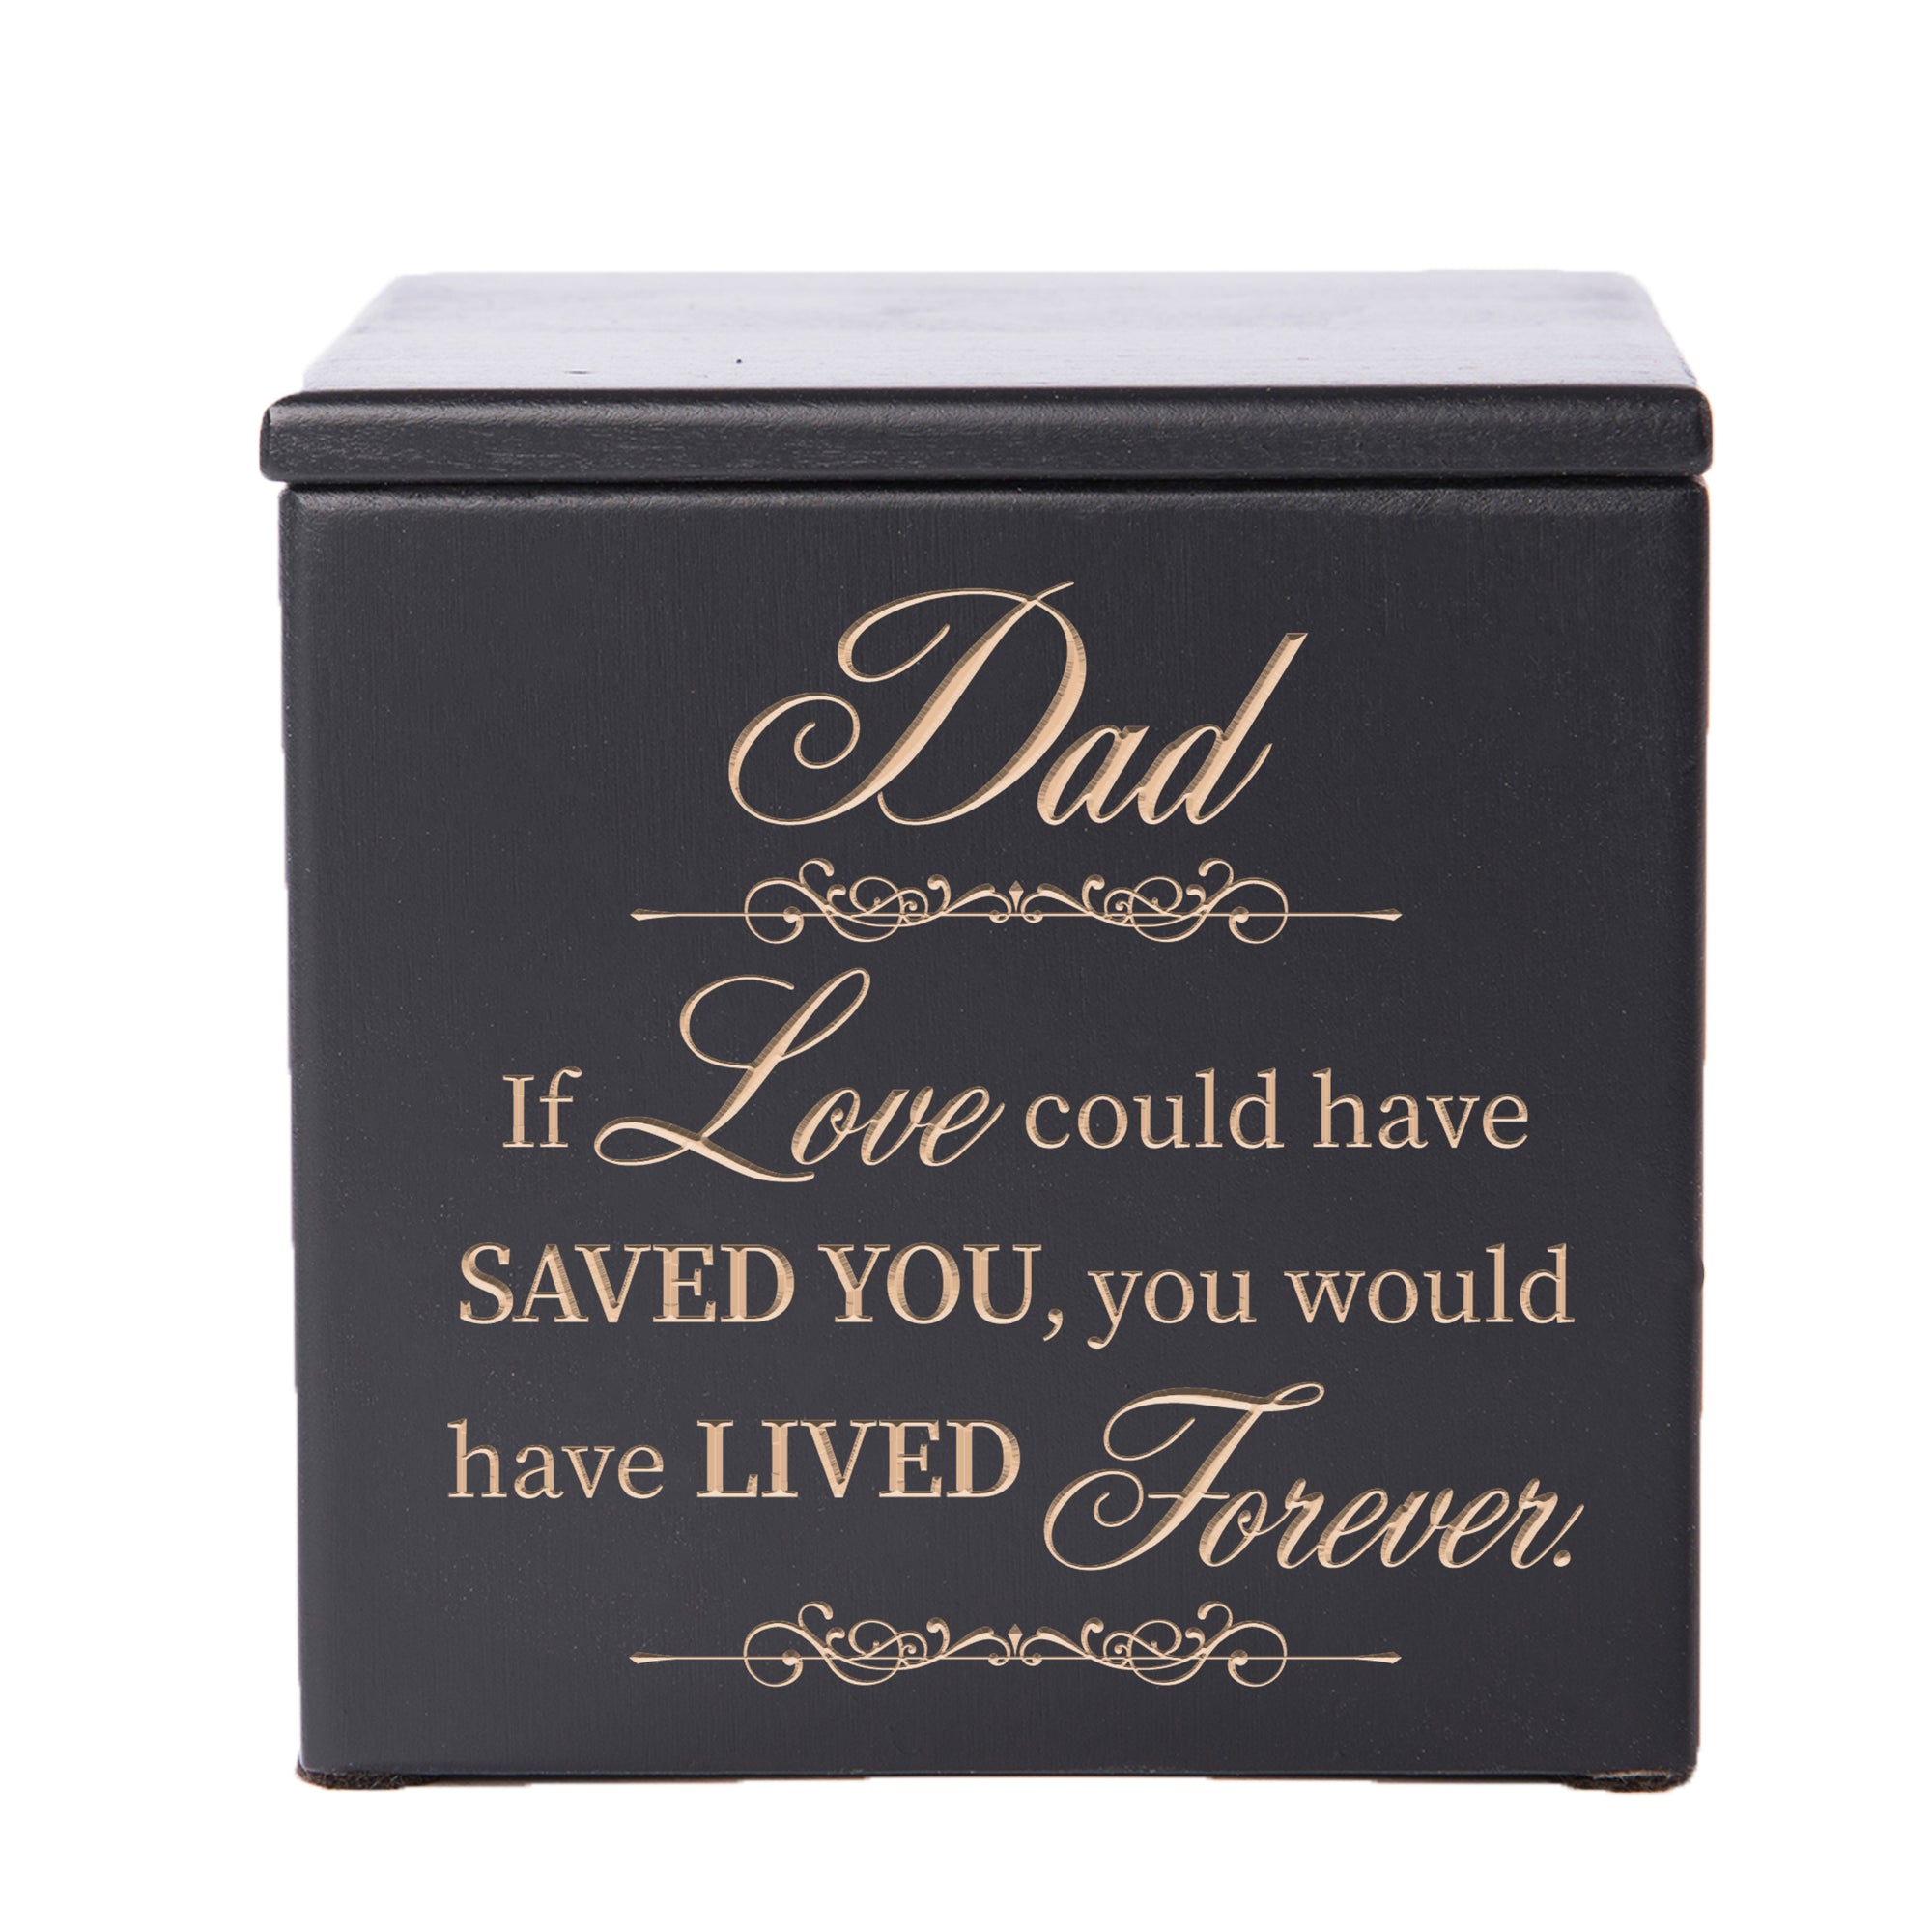 Wooden Memorial Cremation Urn Keepsake Box for Human or Pet Ashes - If Love Could, Dad